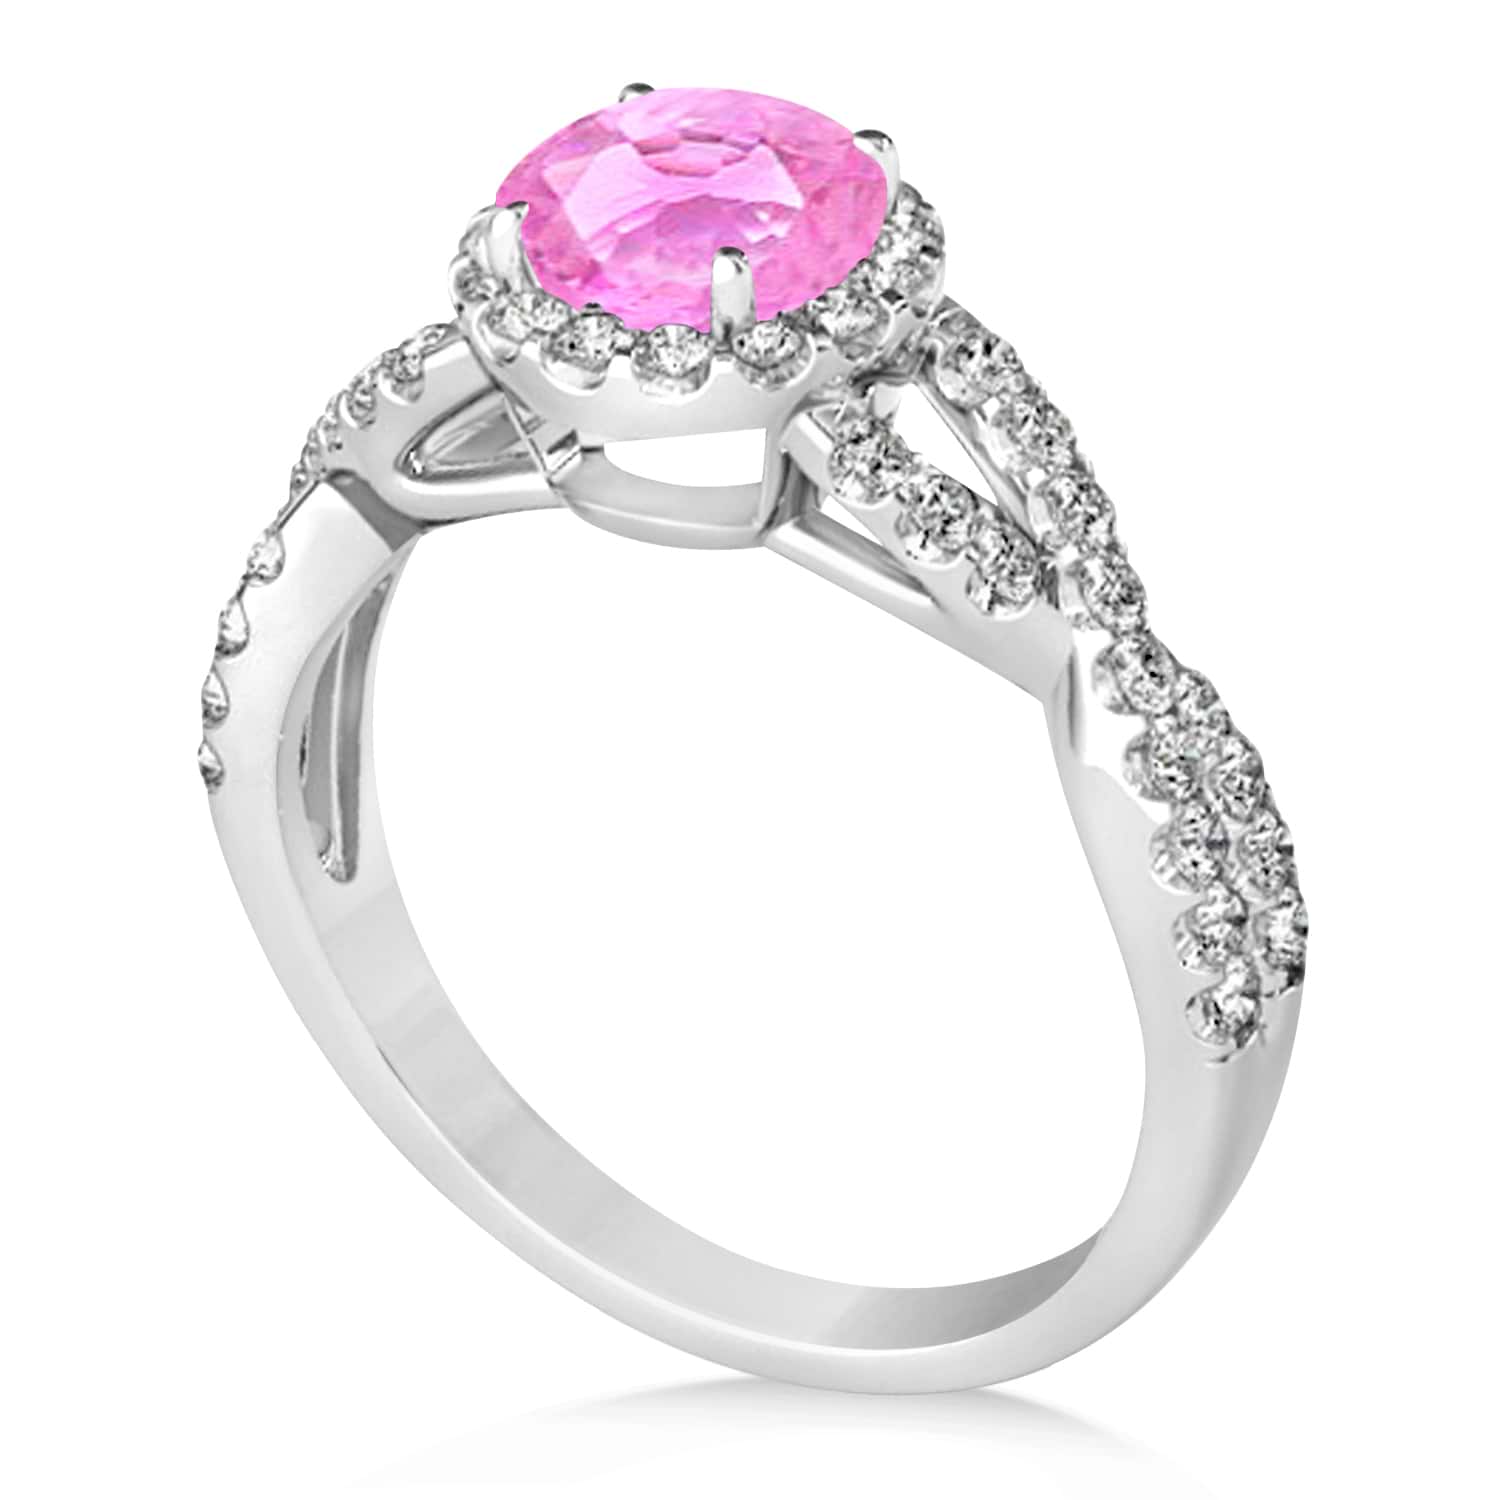 Pink Sapphire & Diamond Twisted Engagement Ring 18k White Gold 1.55ct